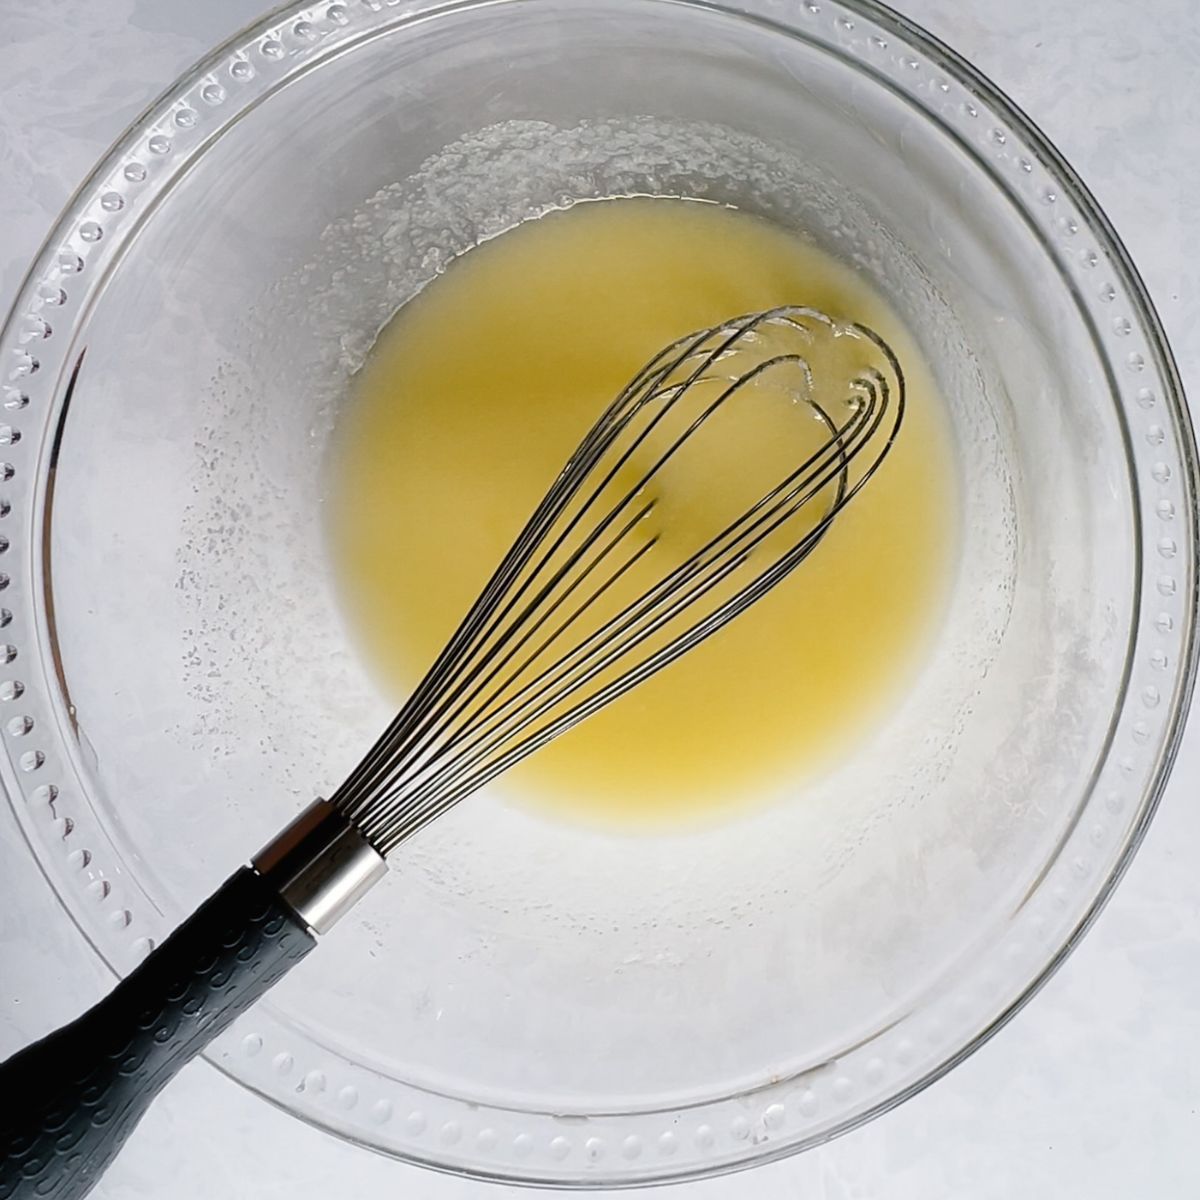 Melted butter, granulated sugar, and eggs whisked in a mixing bowl. 